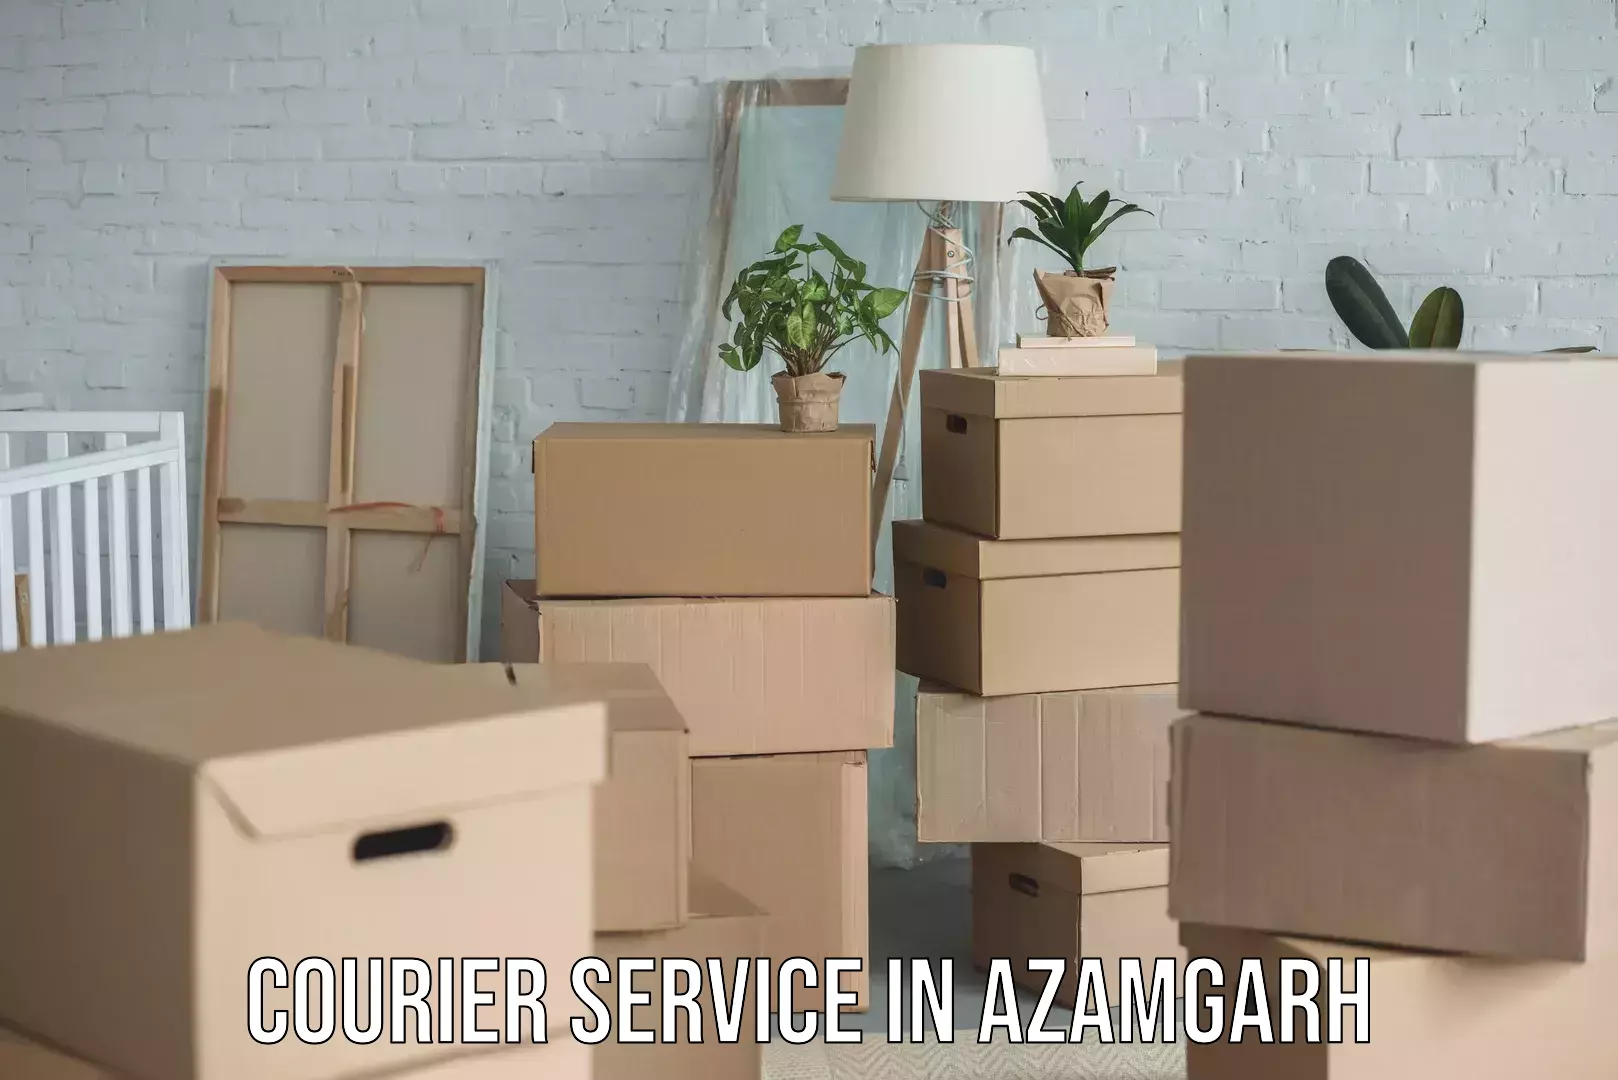 Express courier capabilities in Azamgarh